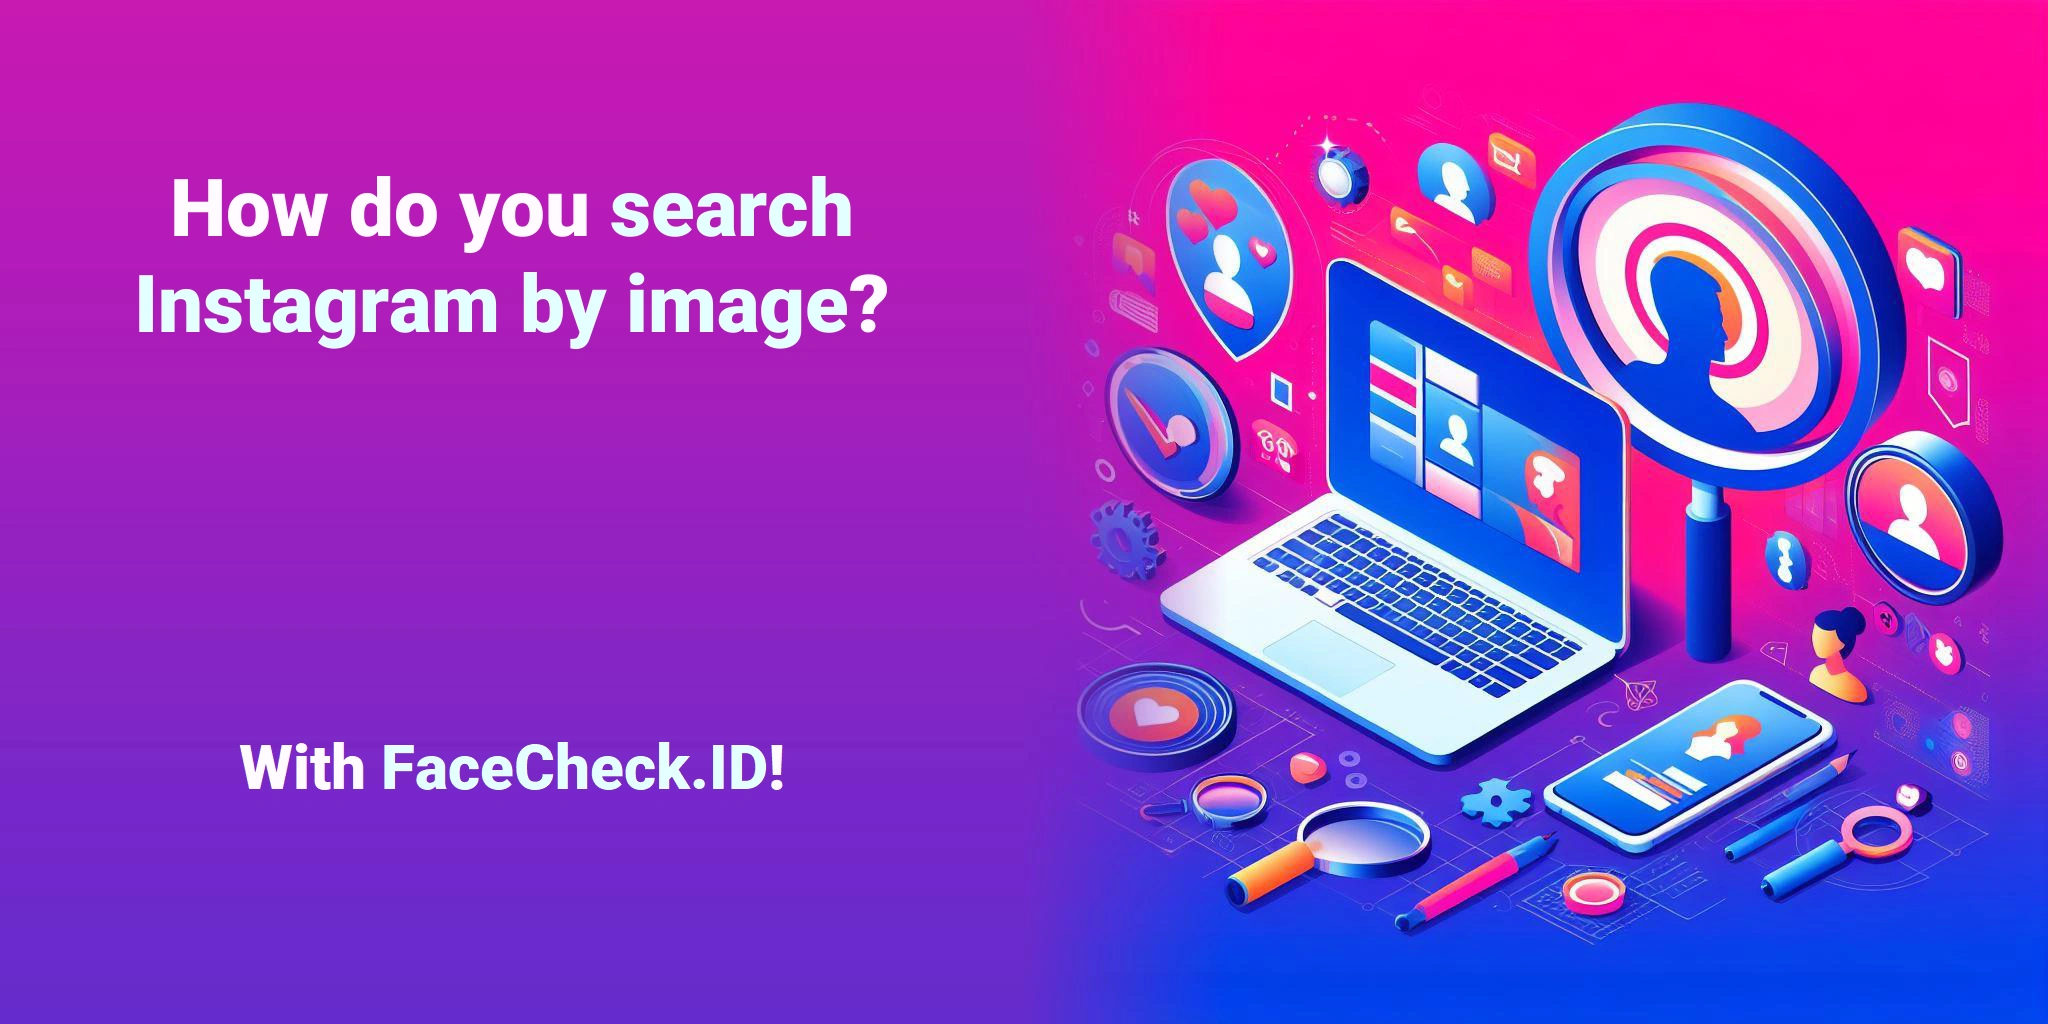 How do you search Instagram by image? With FaceCheck.ID!